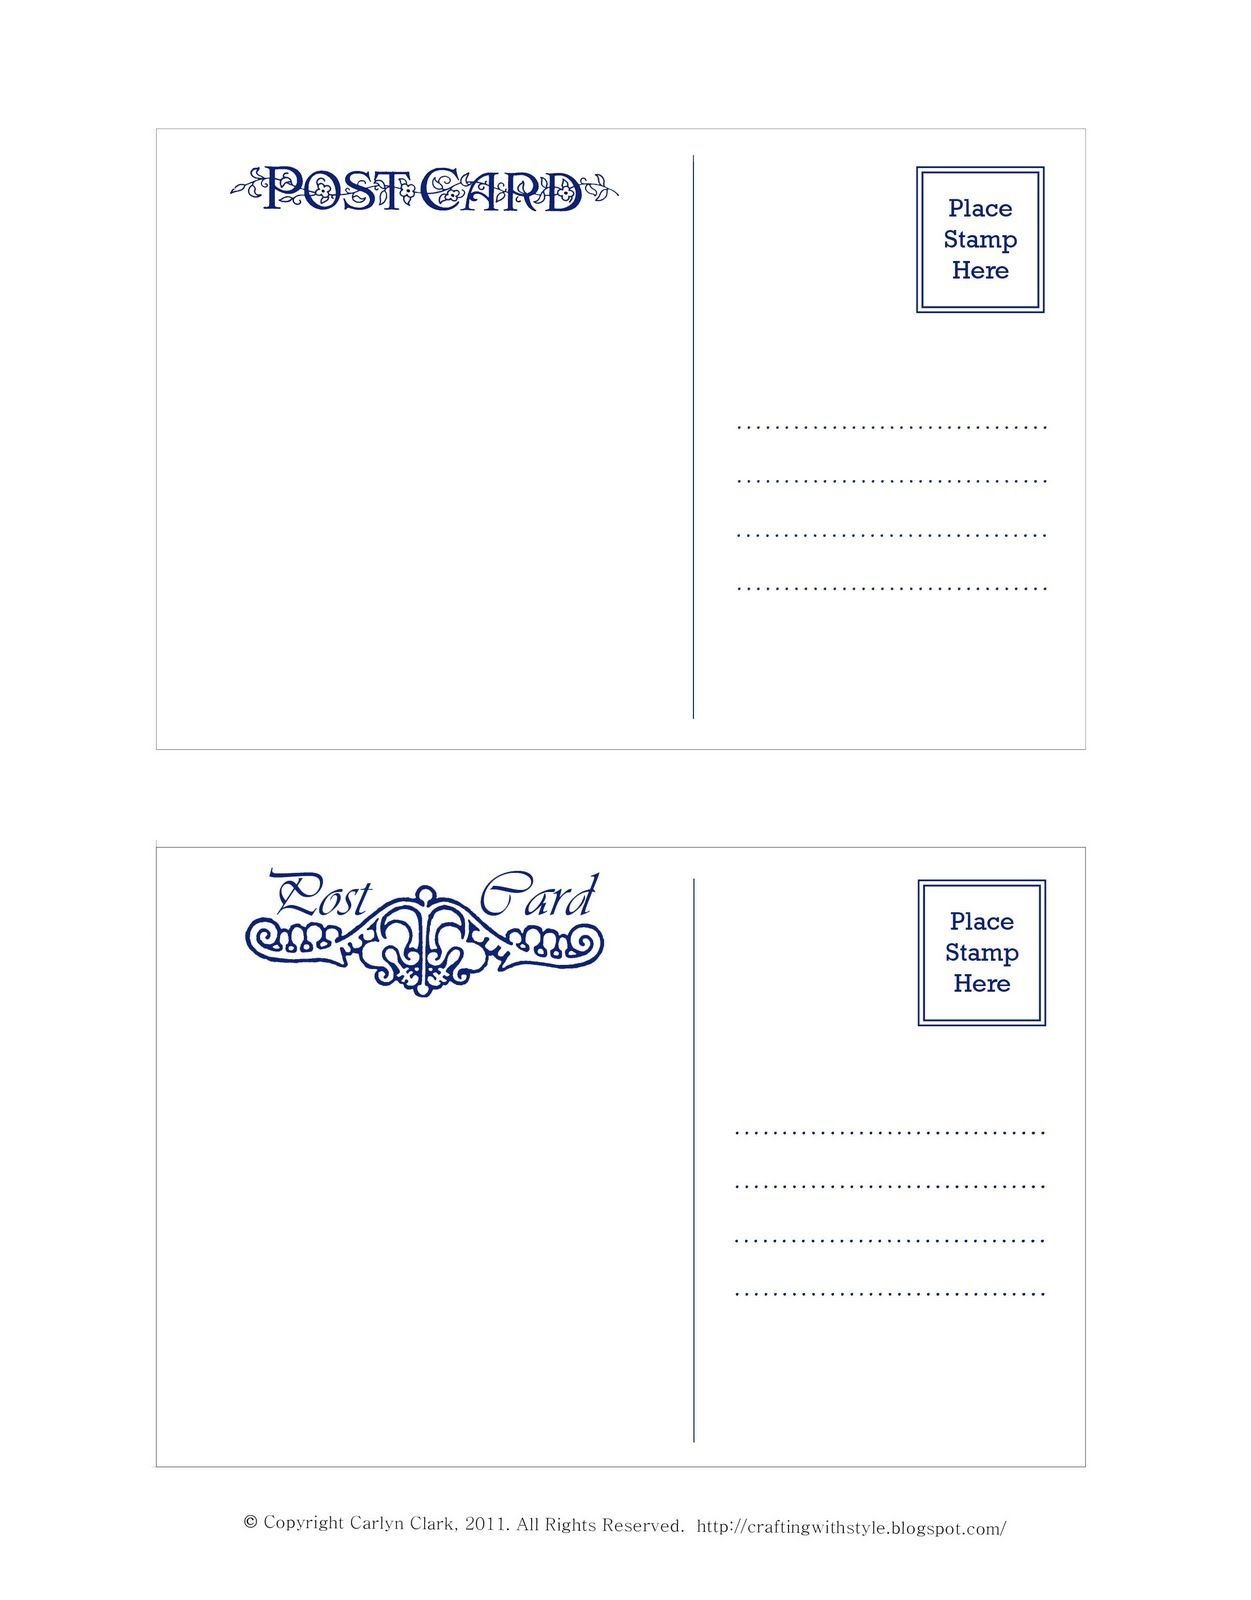 Crafting With Style: Free Postcard Templates | Postcards | Postcard - Free Printable Postcard Template